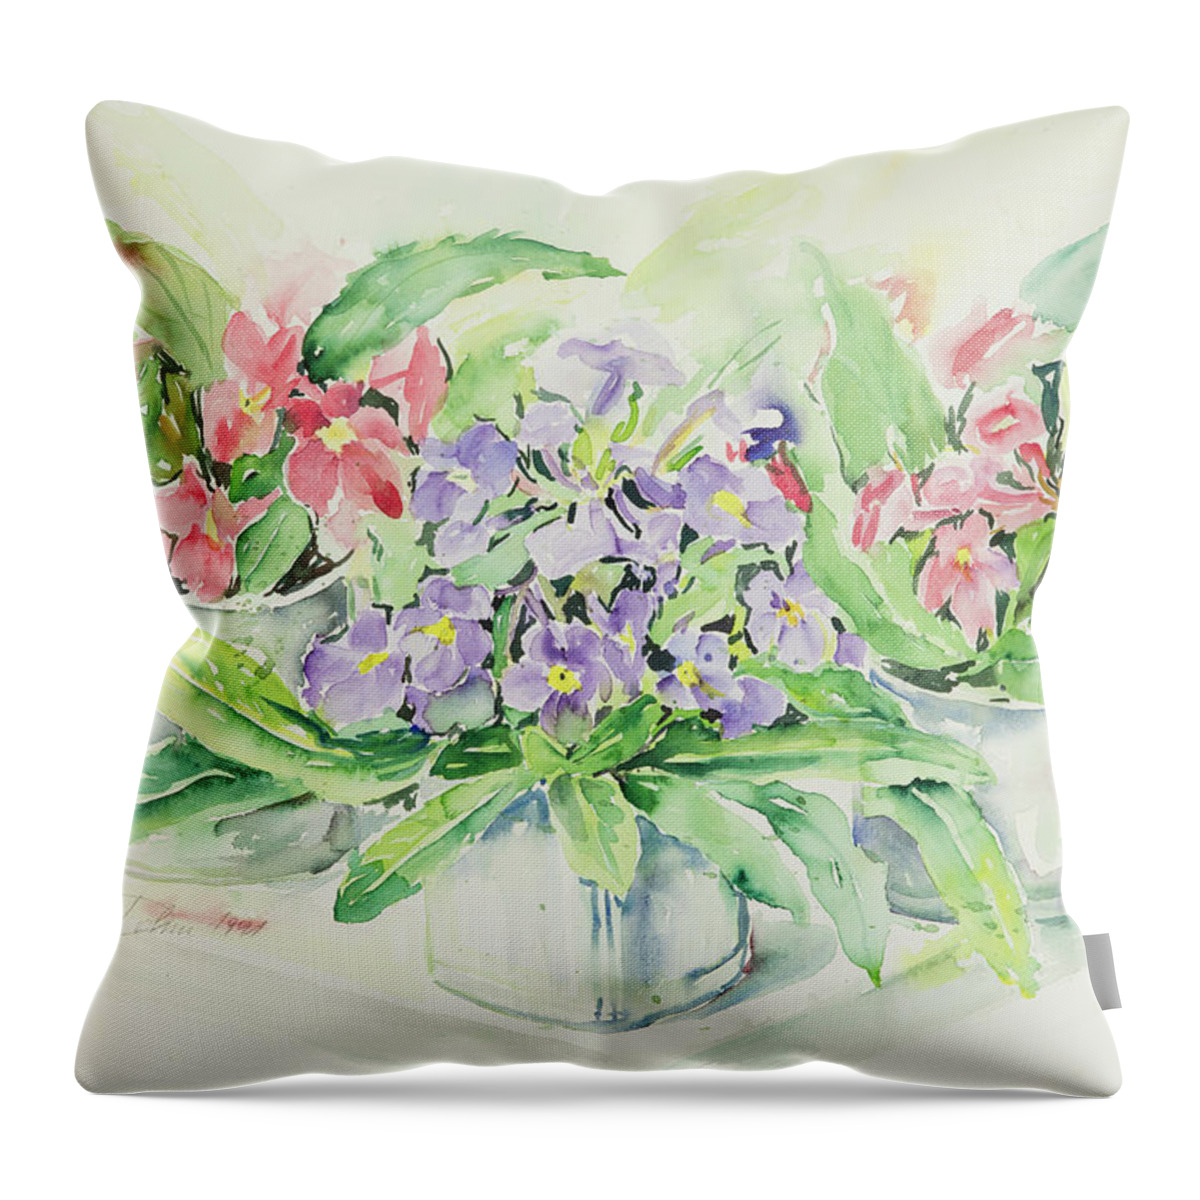 Flowers Throw Pillow featuring the painting Watercolor Series 197 by Ingrid Dohm